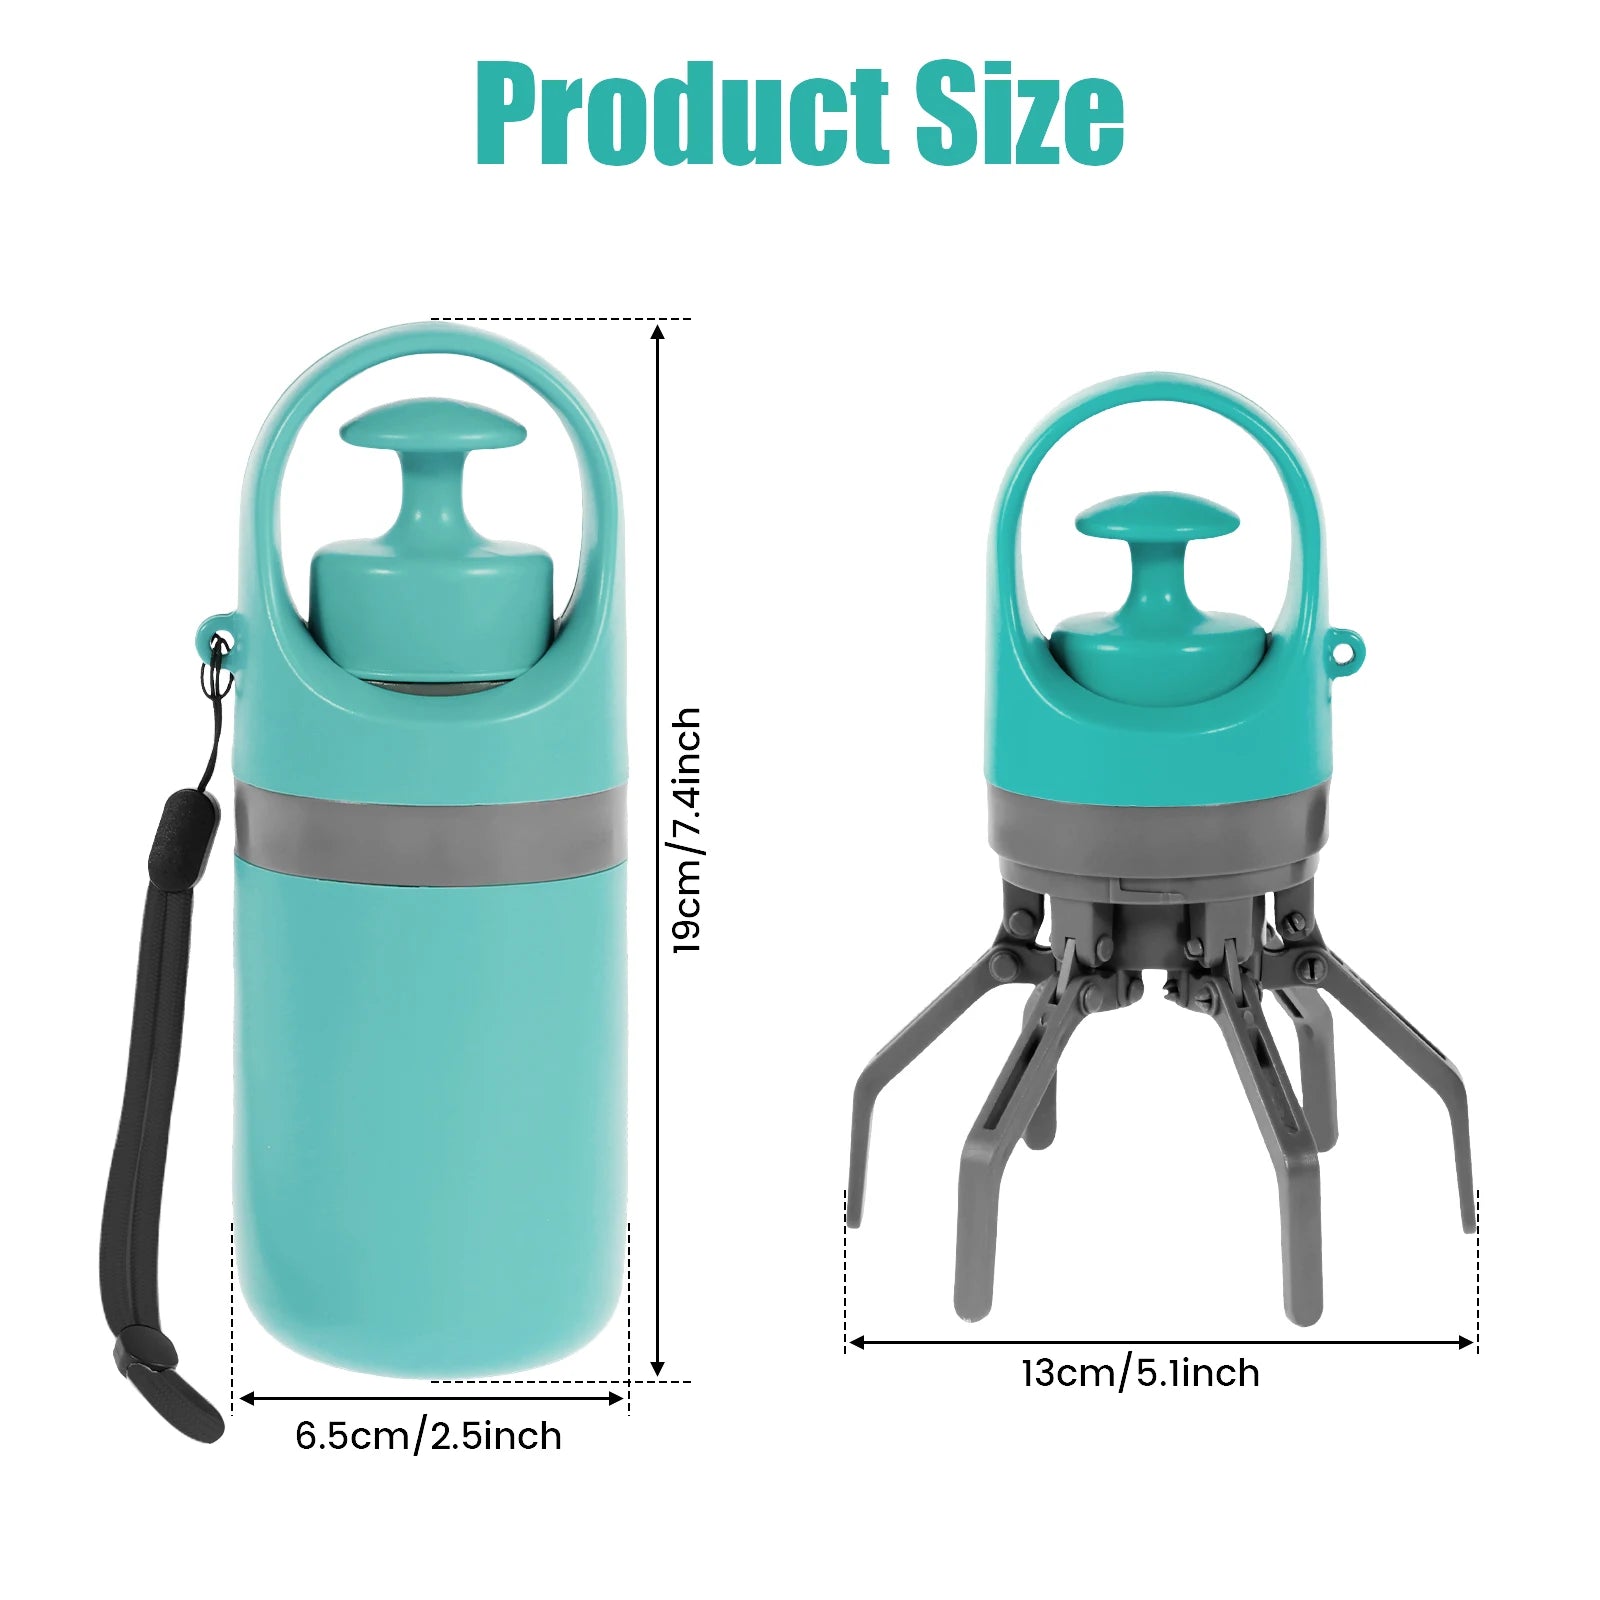 Portable Pet Toilet with Shovel - Lightweight and Compact Outdoor Dog Waste Cleanup Tool